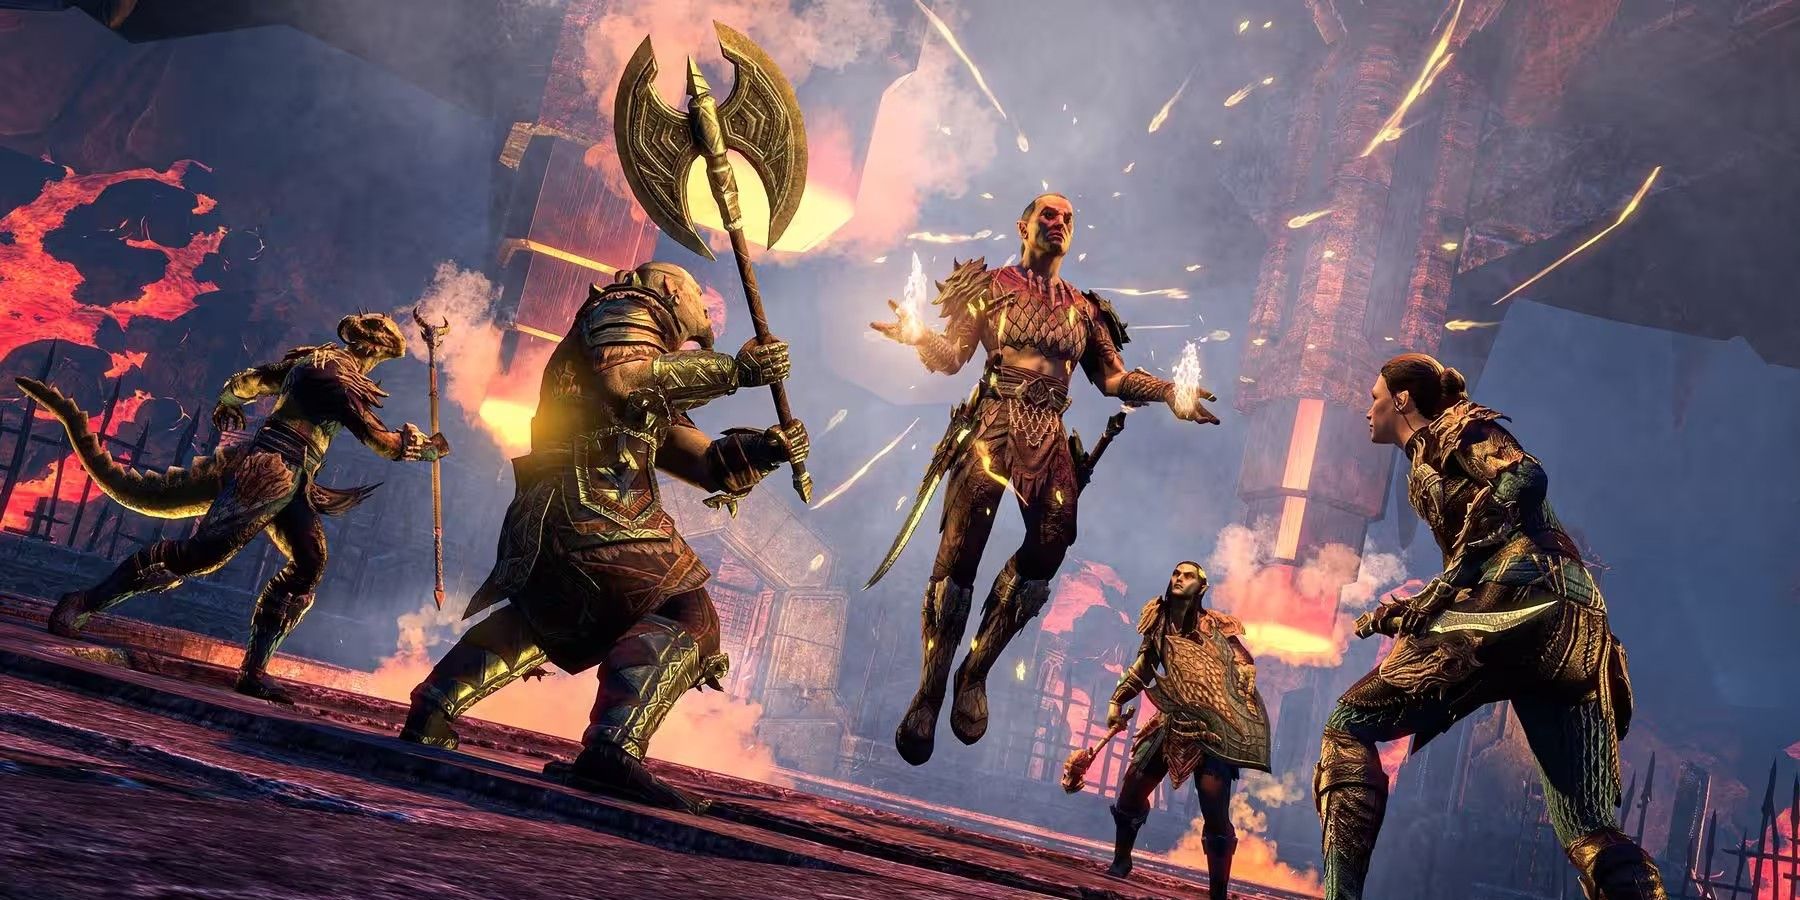 ESO will have a major content release in March 11